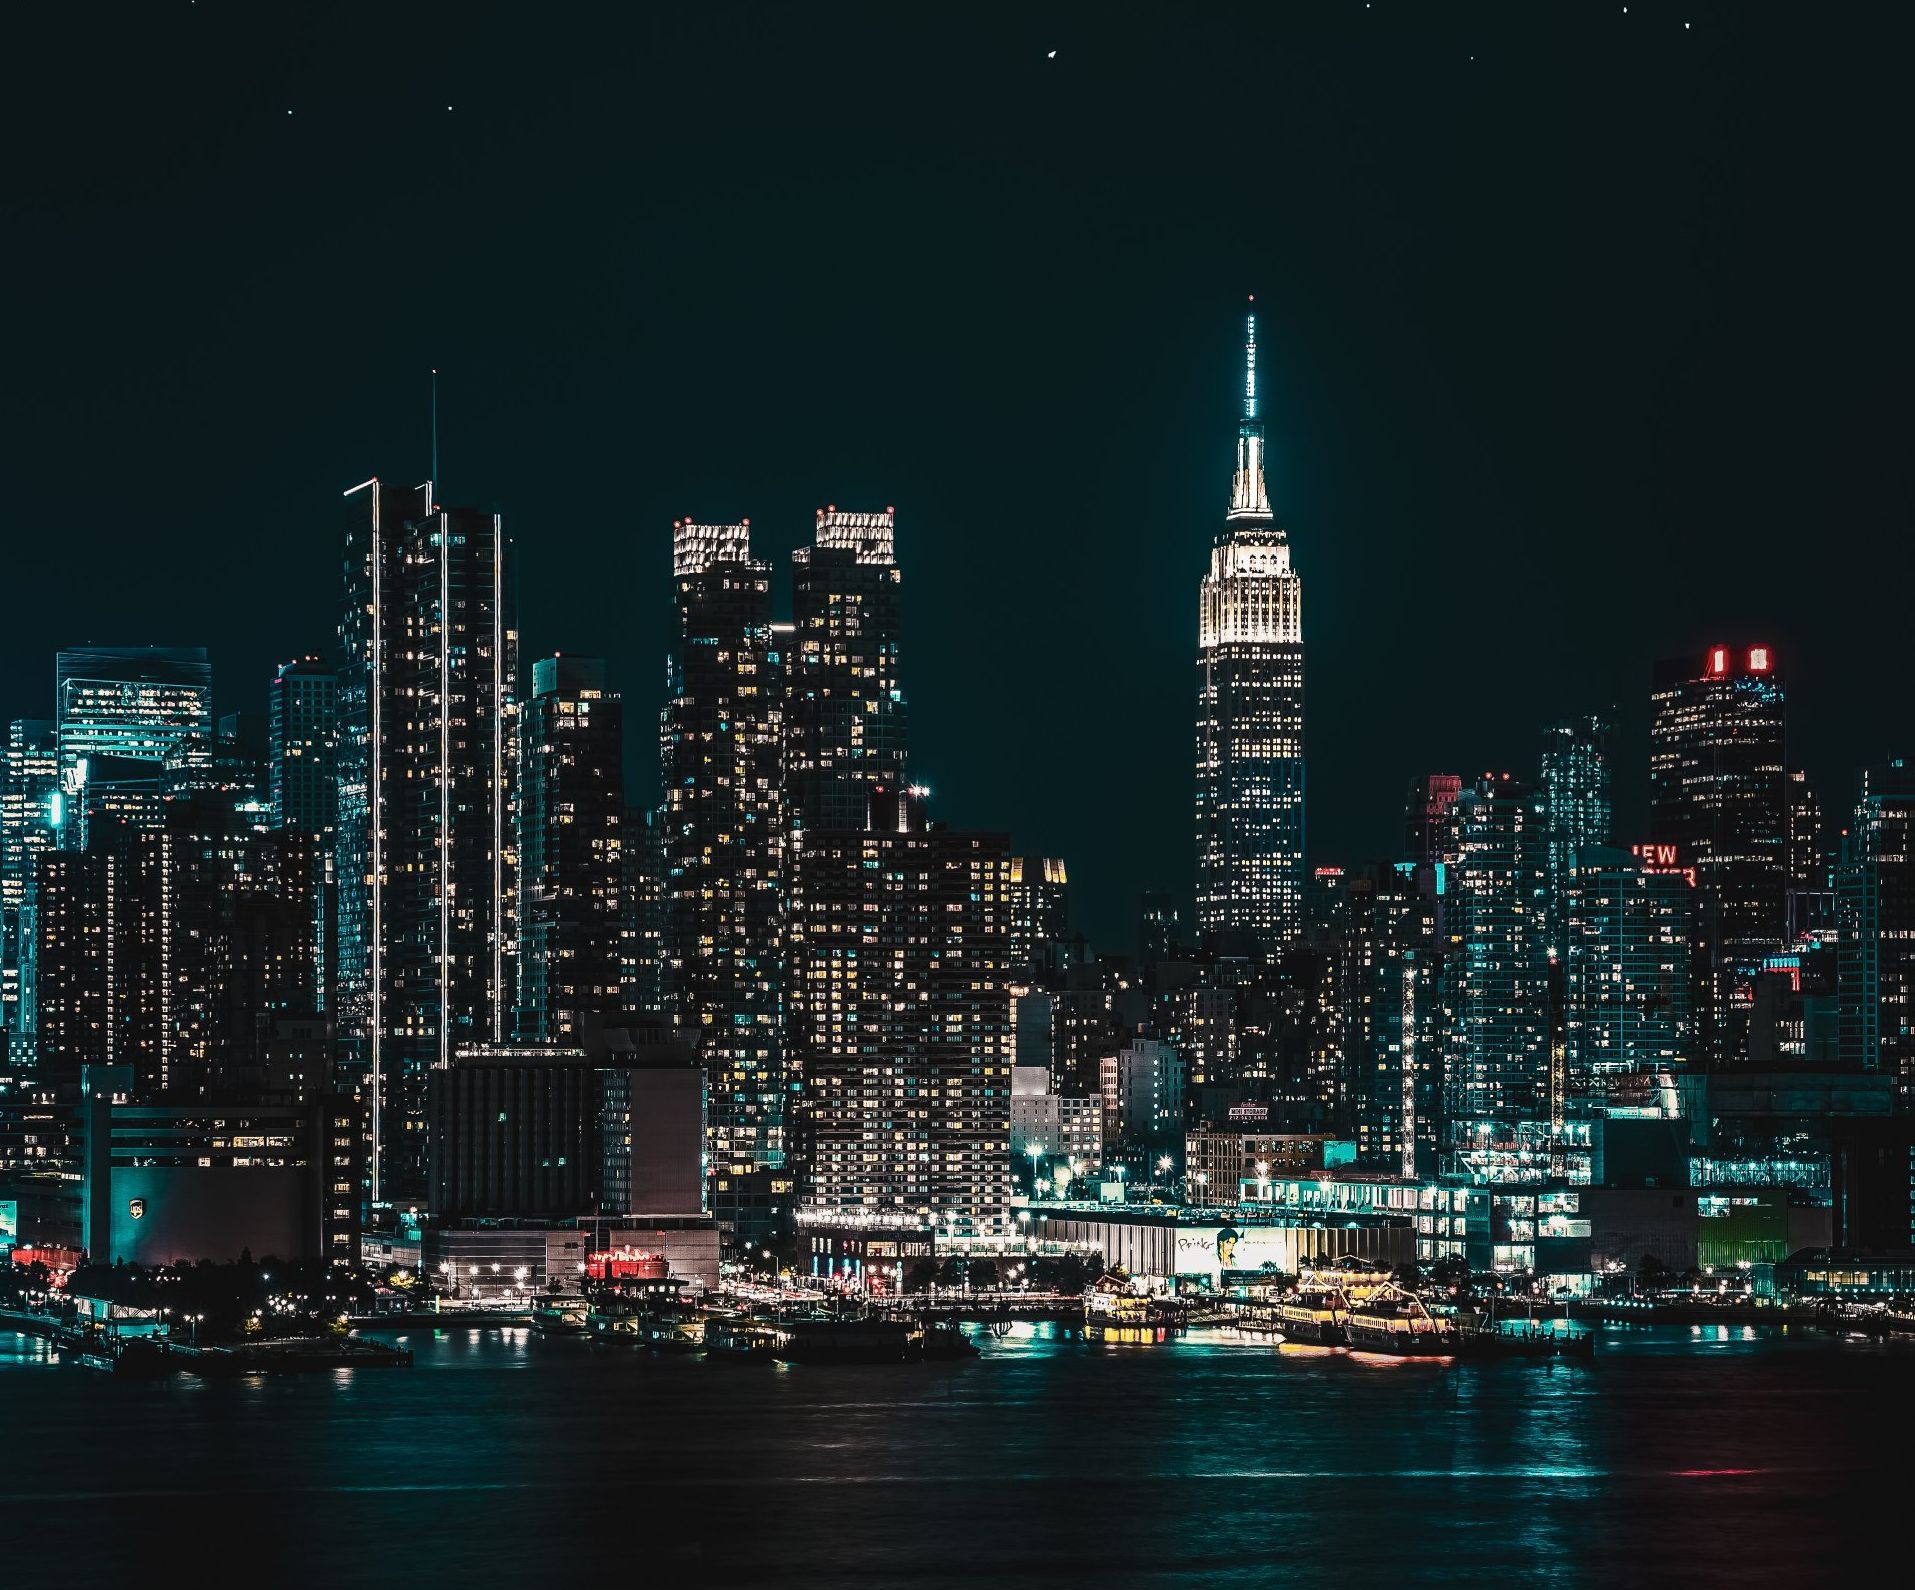 A city skyline at night with the empire state building in the foreground